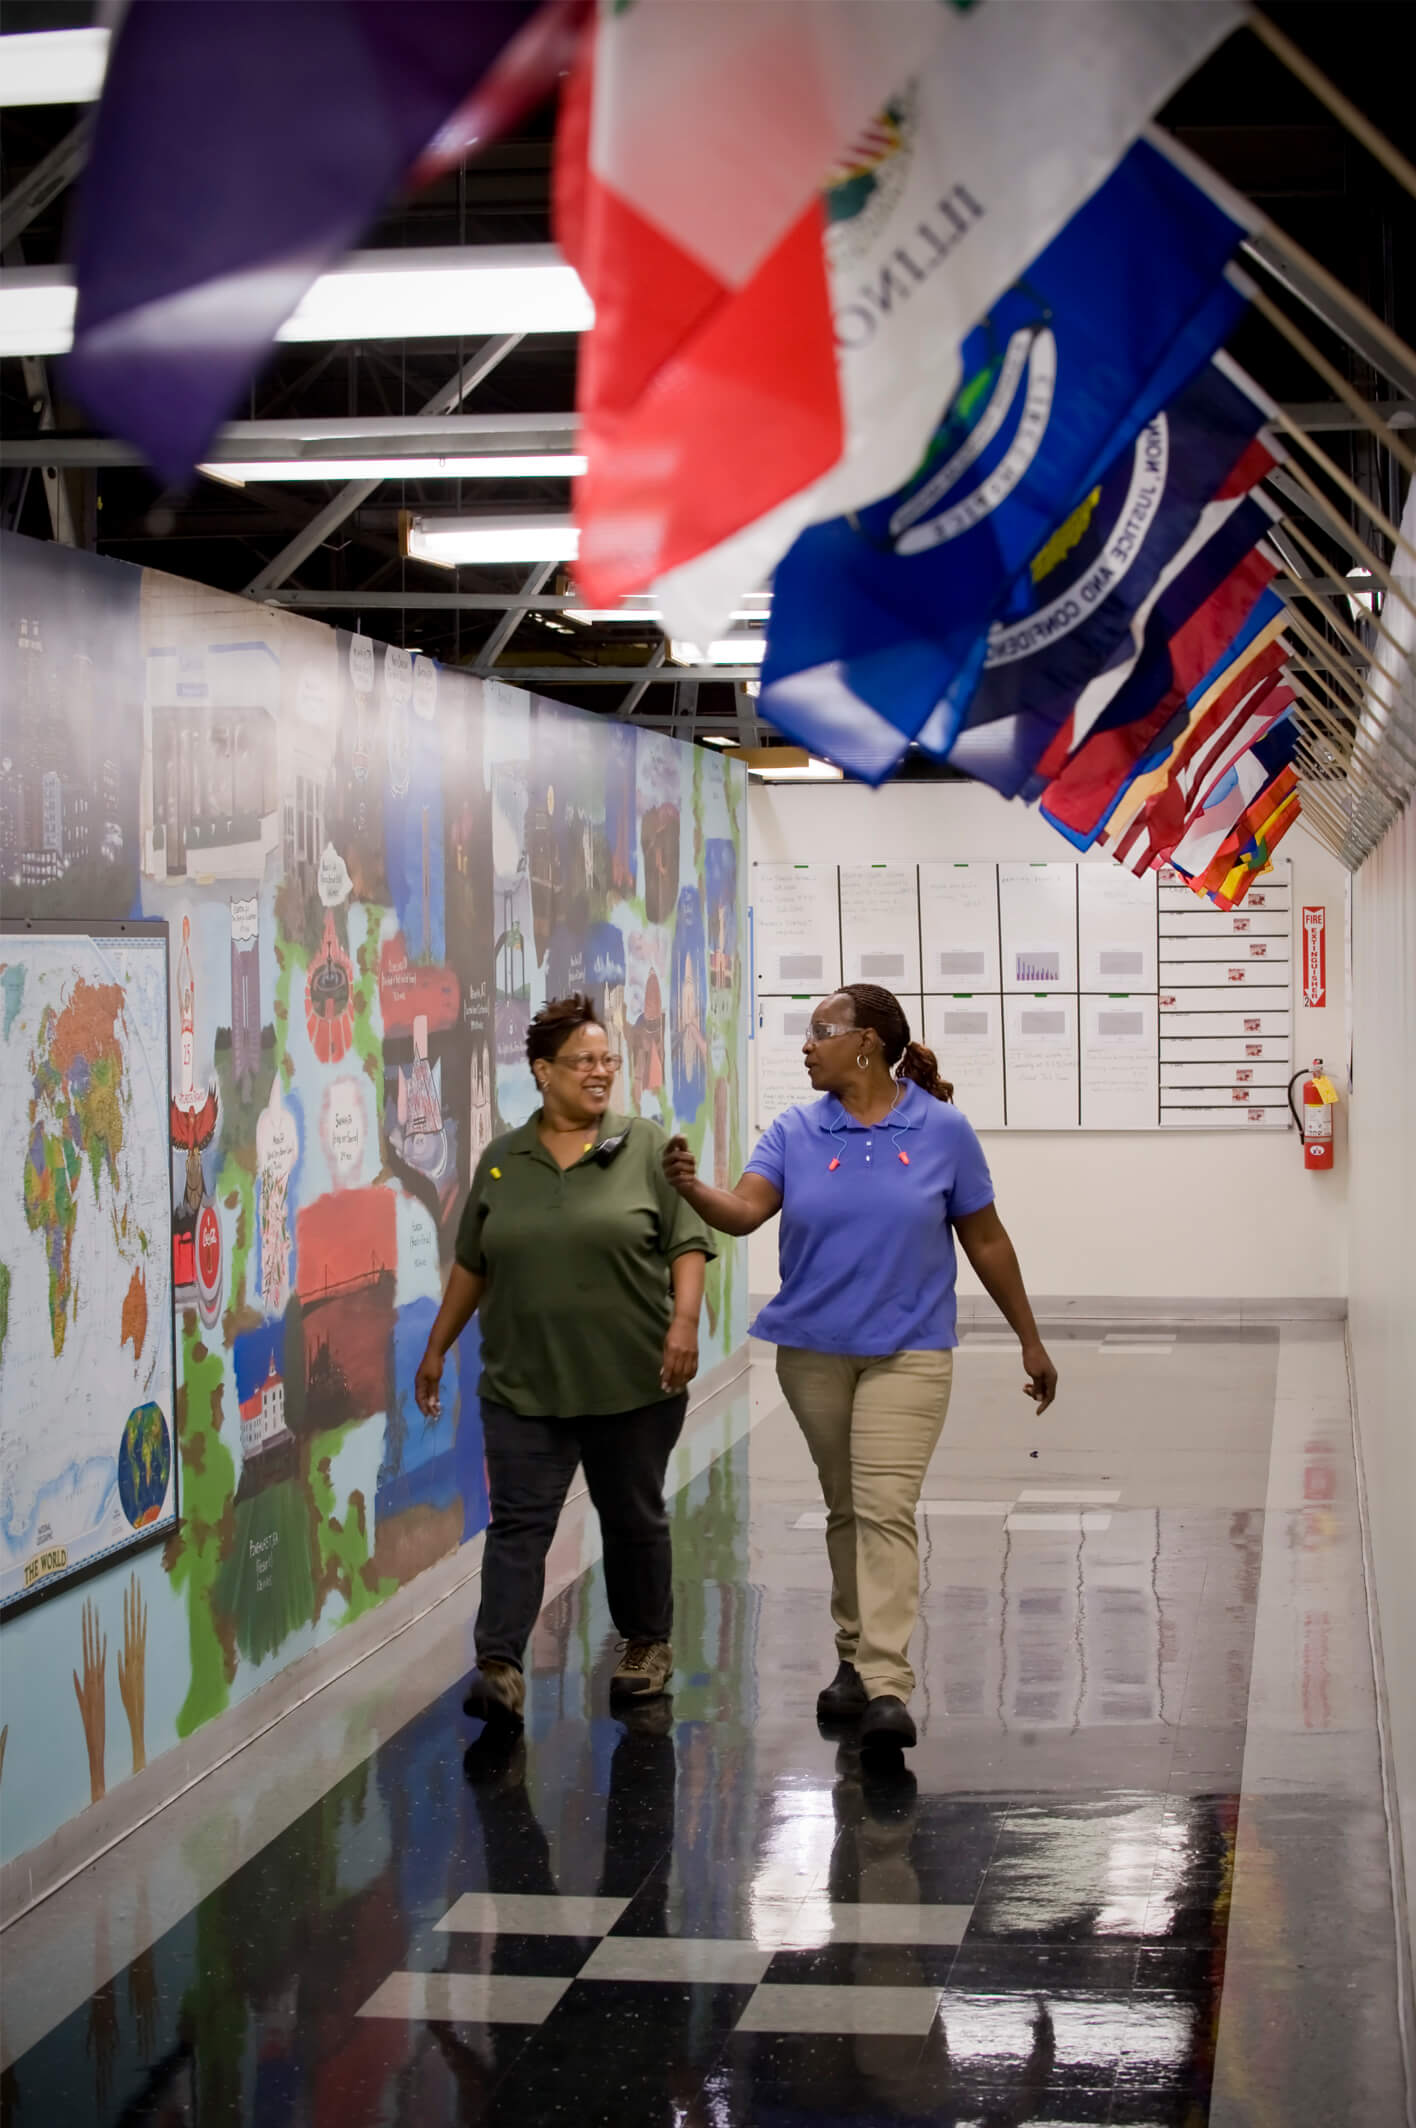 Two women walking down a hallway with national flags hanging from the wall.